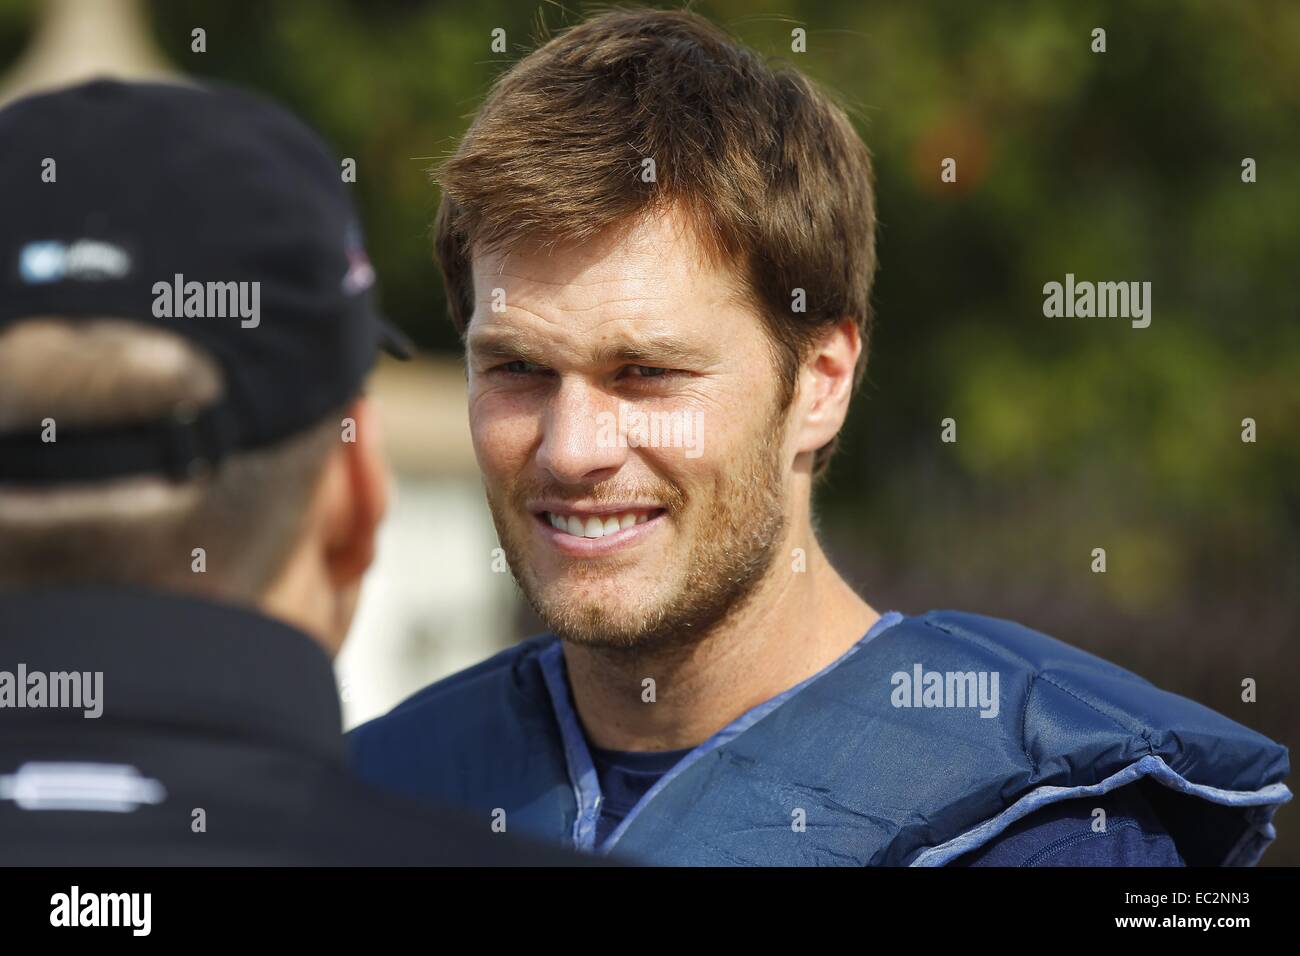 San Diego, CA, USA. 5th Dec, 2014. Dec. 5, 2014 - San Diego, California, USA - New England Patriots quarterback Tom Brady talks with Pebble Beach CEO Bill Perocchi before practice at the University of San Diego. The Patriots spent the week practicing at the school leading up to a Sunday night game against the San Diego Chargers. © KC Alfred/ZUMA Wire/Alamy Live News Stock Photo